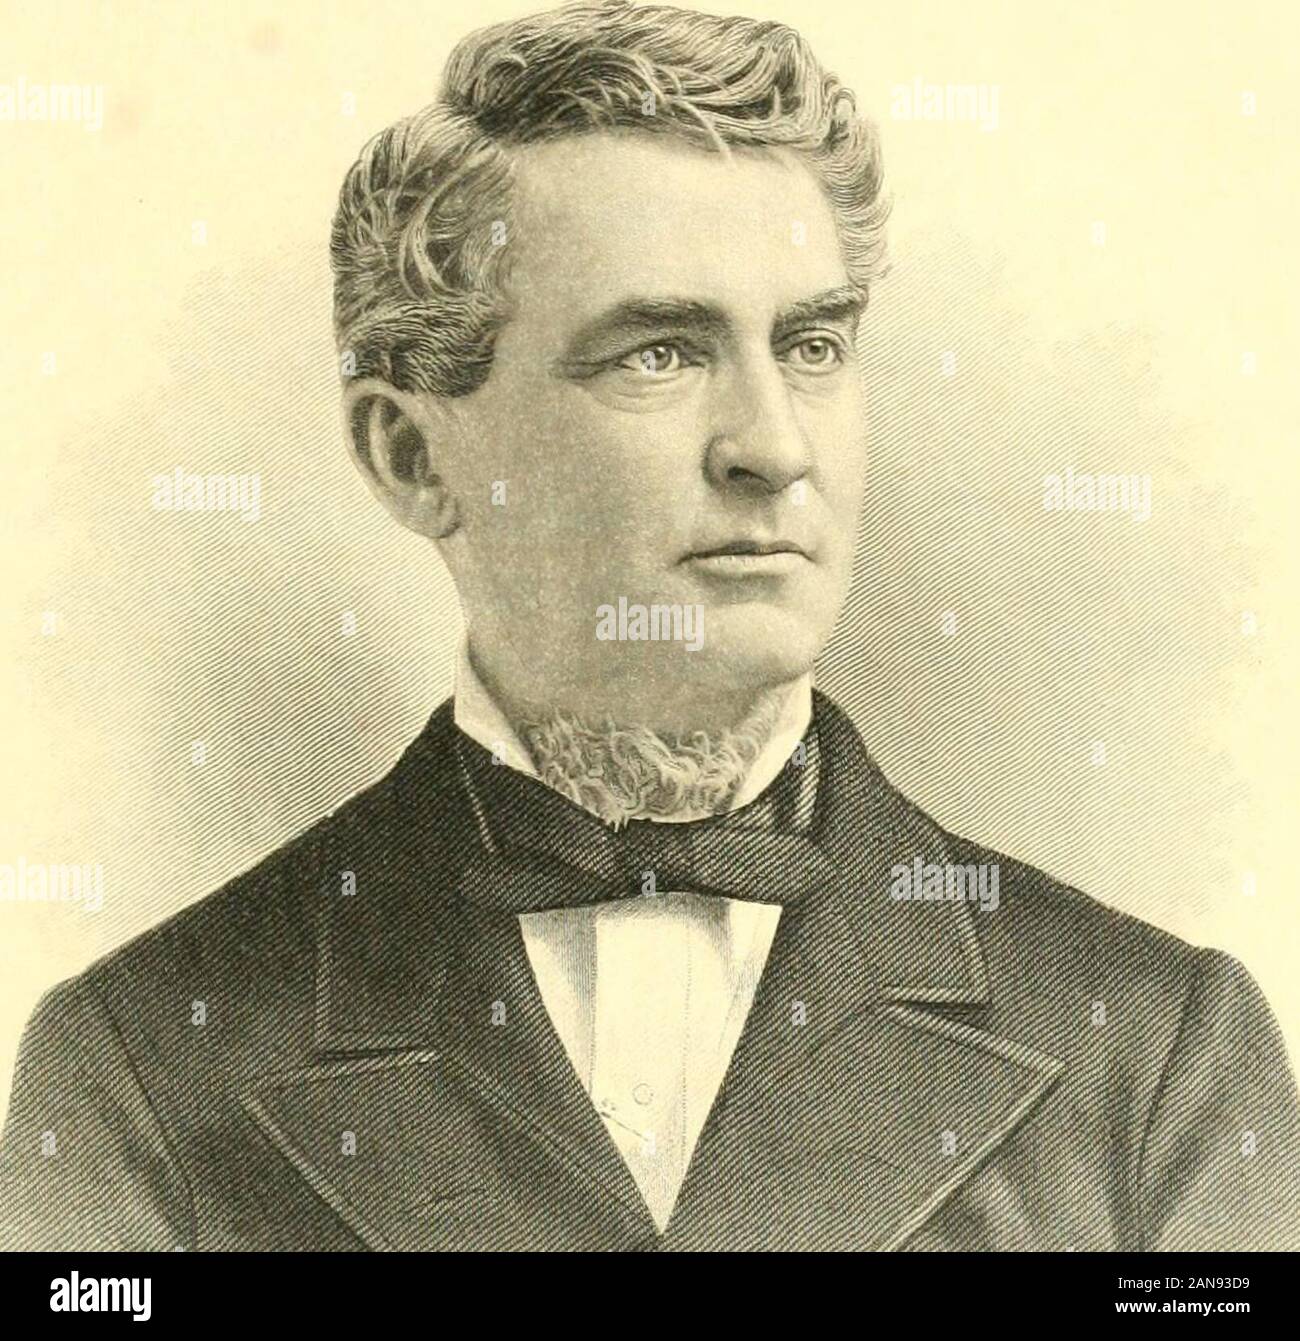 New Jersey as a colony and as a state, one of the original thirteen . met in William Walter Pbelps, L.L.D., b. New Tork Citr,Aug. 24. 1830; grad. Yale College 1860 and ColumbaLaw School ISW; member of Congreaa 1873-75 ia 17, 1864. ^ ;i&gt;4&gt; NEW Y AS A COL (hanges in the organic law, thr- demand beingmader/^p/^JS Mtexadi lt^flemTof&gt;|dl Ji^^lttidfektte and forfto;giEgtiQli.v&gt; ^ ? ^ It vrfasii ?^^- „... to ^to8.i W2^1s?tvestigres c er v4i;e ot a 7;T-, - Mr..i,. .,-.- ,.. J.,.. „../ -. ^-l.^^;. yy At Large—John P. Stockton, McDermot , Cam- ^ -tricts were I Oarrow, ,dward . JOJQIl . v^ii Stock Photo